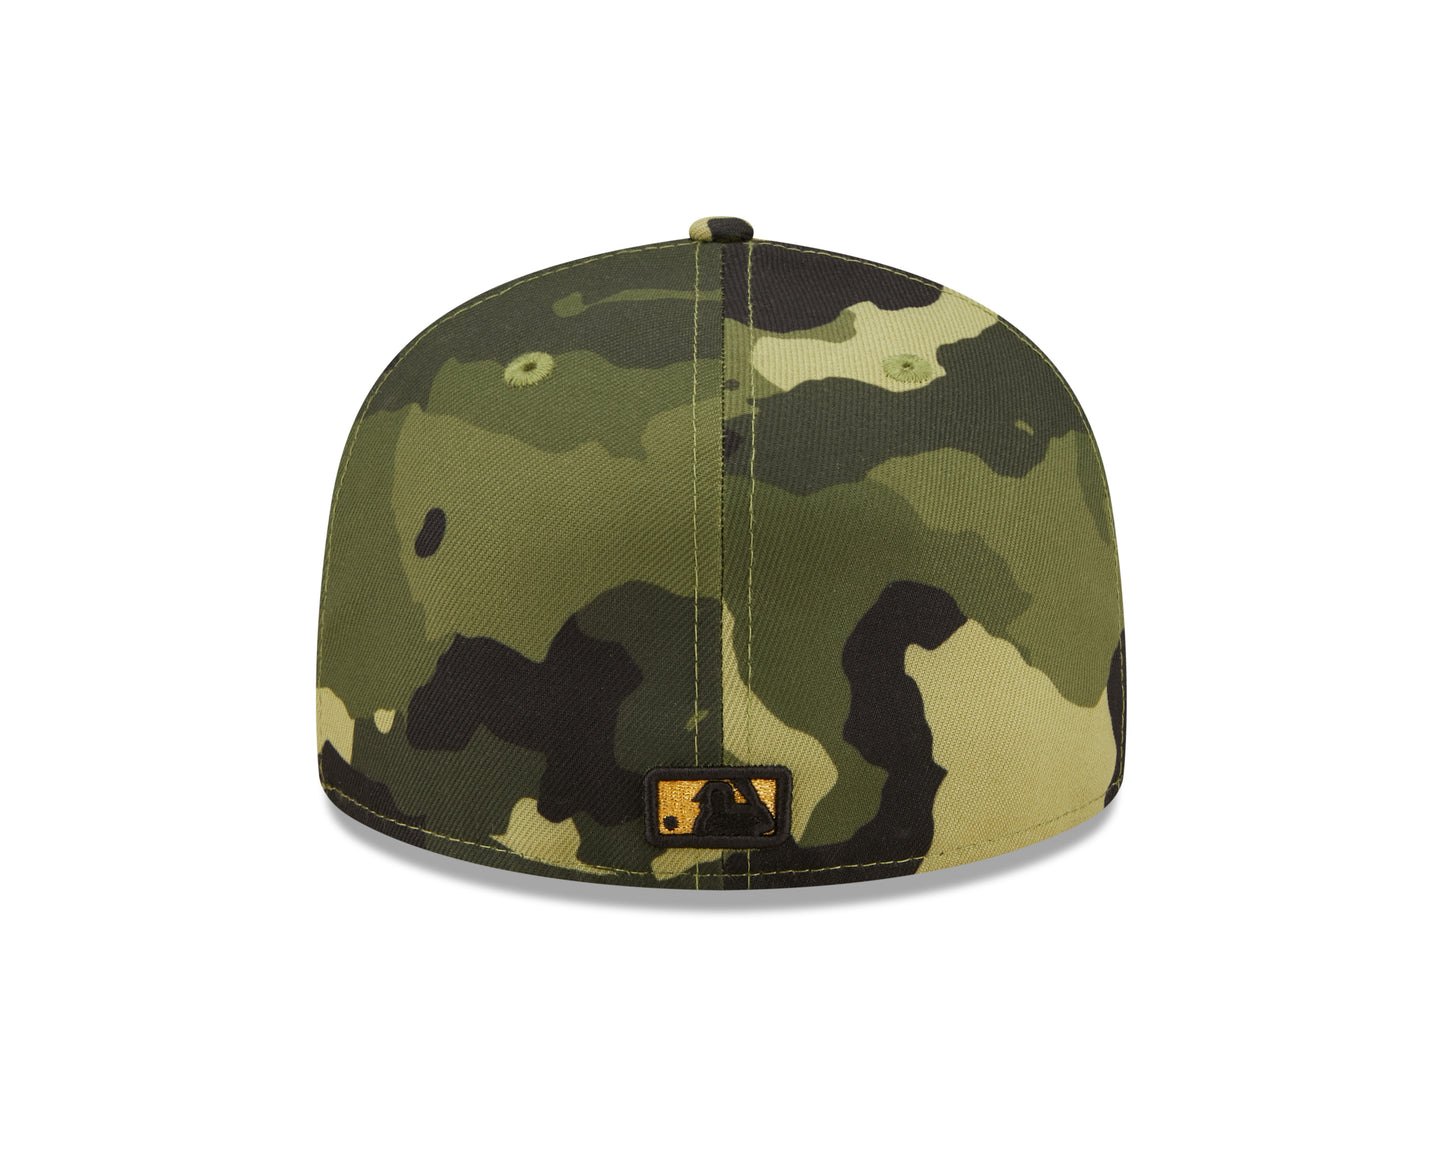 Cincinnati Reds New Era Camo Armed Forces On-Field 59FIFTY Fitted Hat